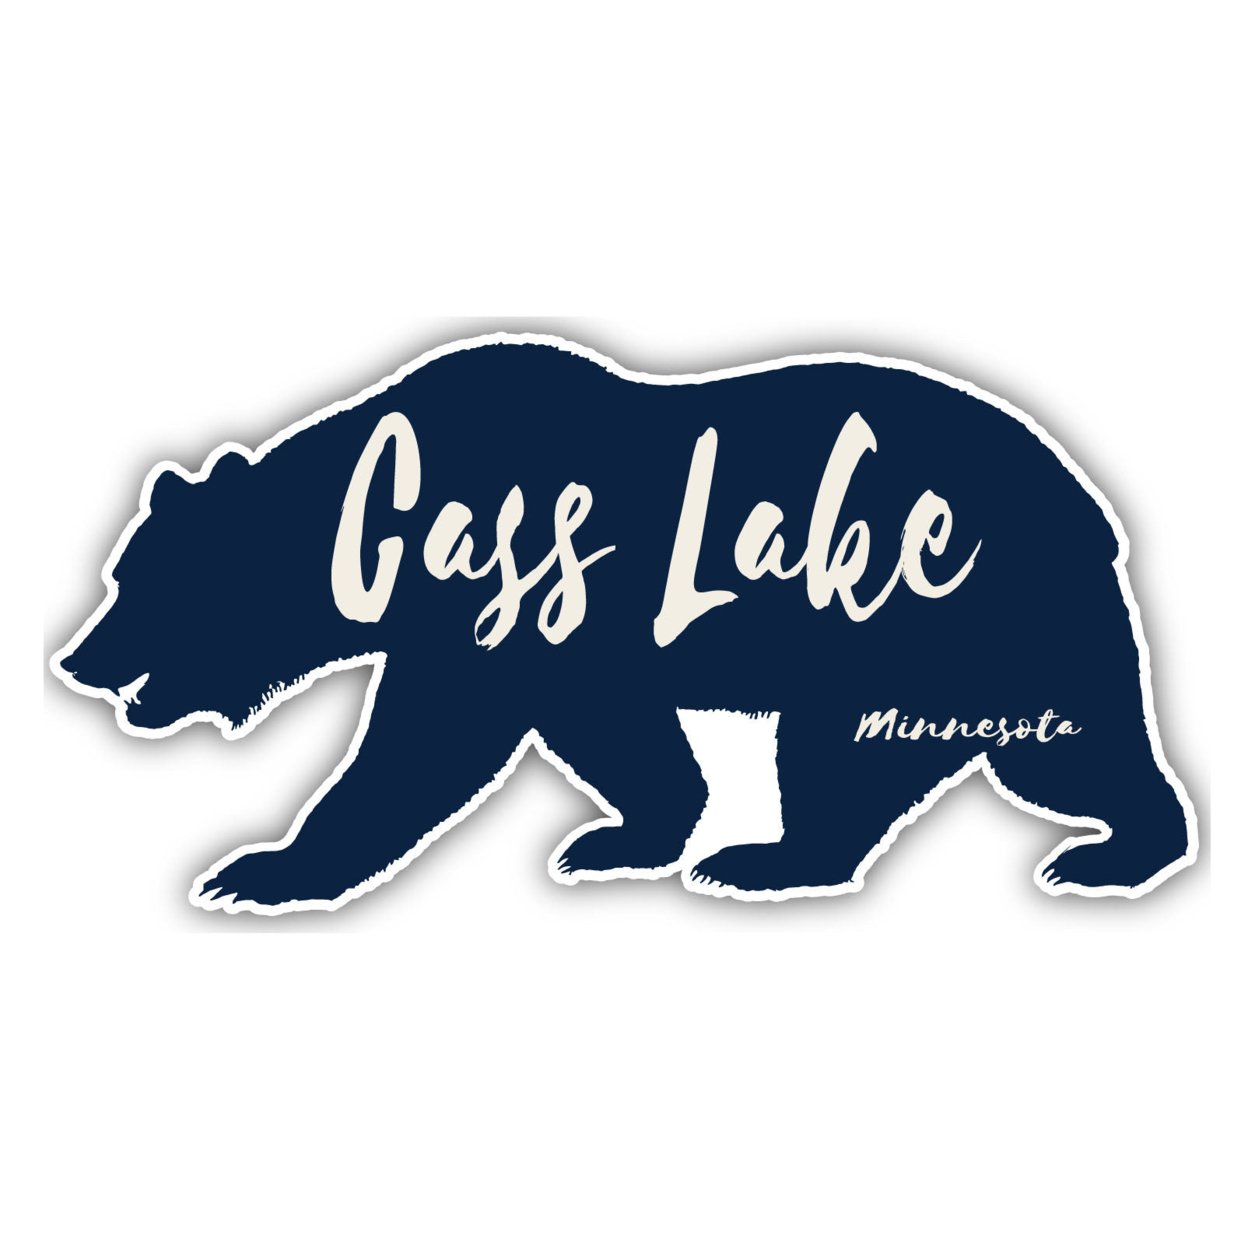 Cass Lake Minnesota Souvenir Decorative Stickers (Choose Theme And Size) - 4-Pack, 10-Inch, Camp Life